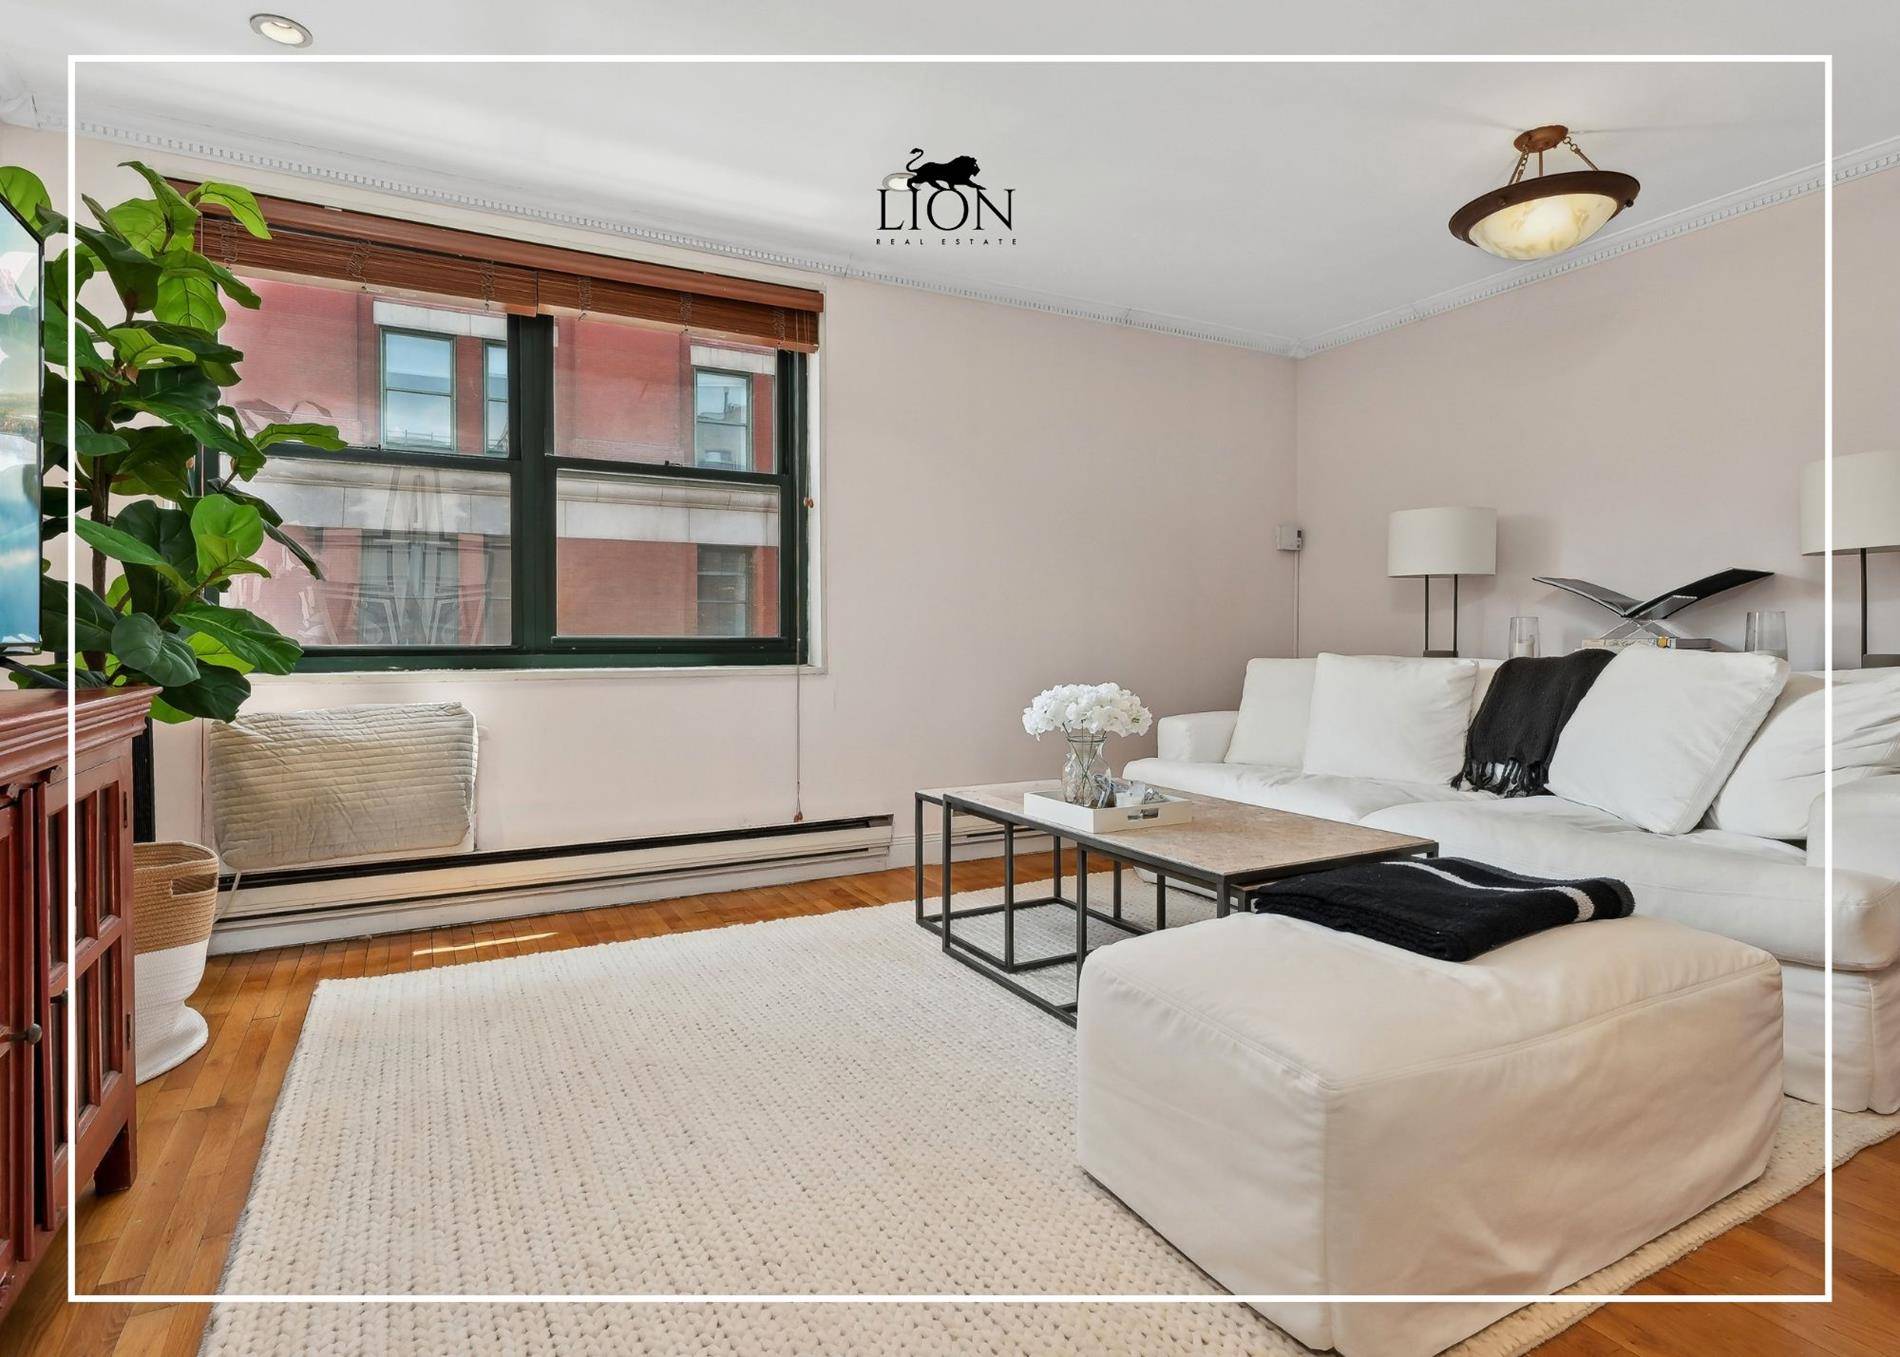 DEAL ALERT ! Don't miss out on this rare opportunity in the West Village Houses buildings a spacious two bedroom apartment with triple exposure for less than 1M !